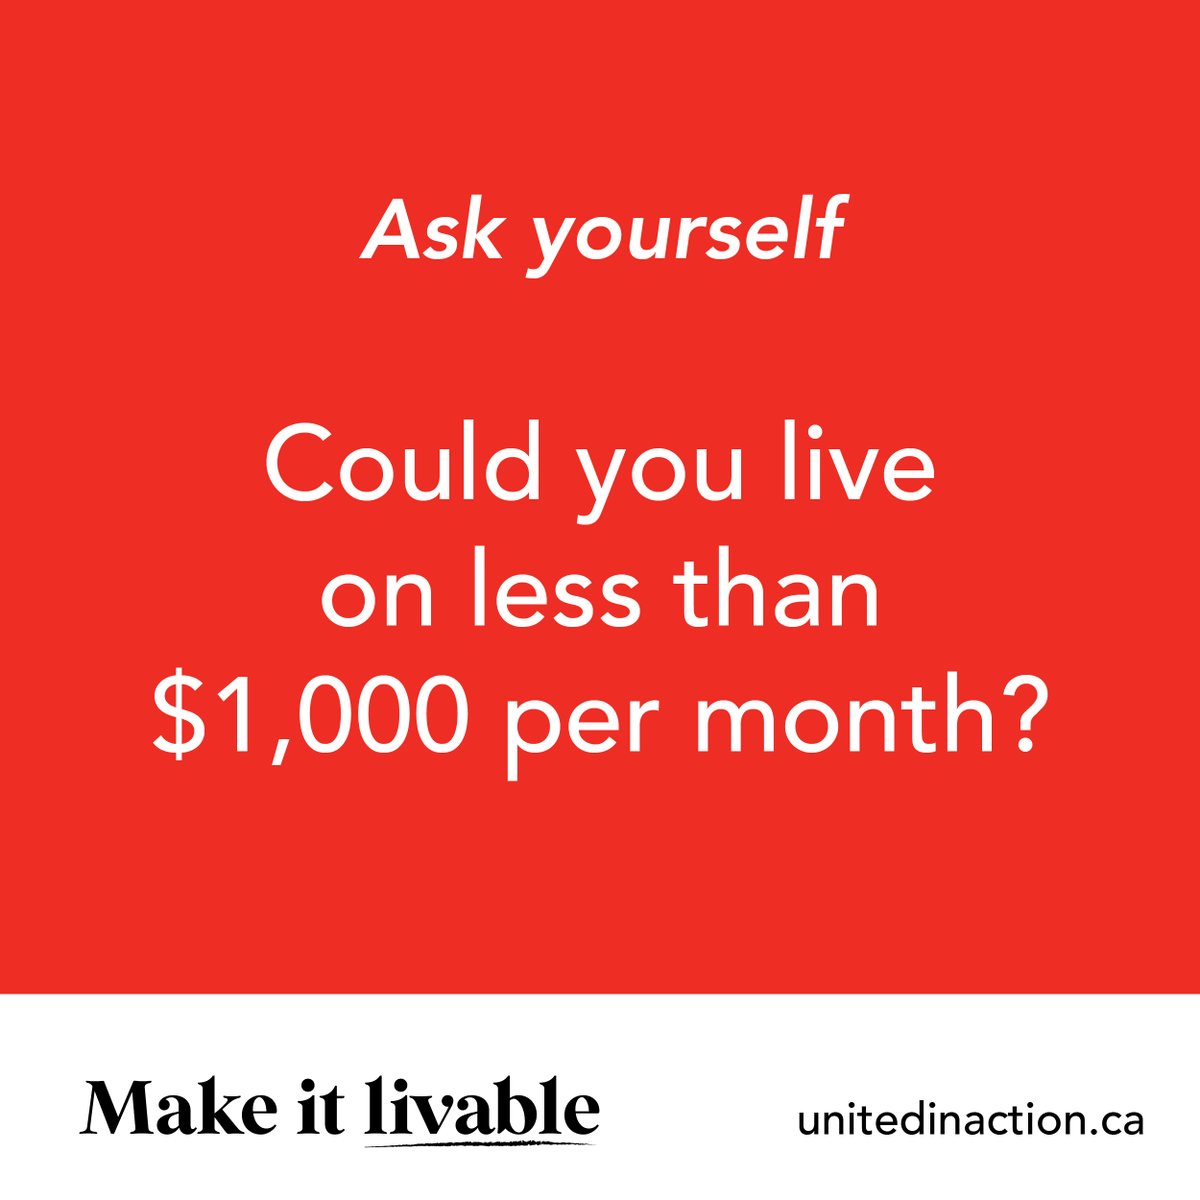 Social assistance rates in Ontario are so low that recipients’ incomes don’t even approach the poverty line. Because everyone deserves a dignified, livable income, we ask you to endorse our call to #MakeItLivable. ow.ly/wkSu50QrpMb #onpoli #UnitedInAction